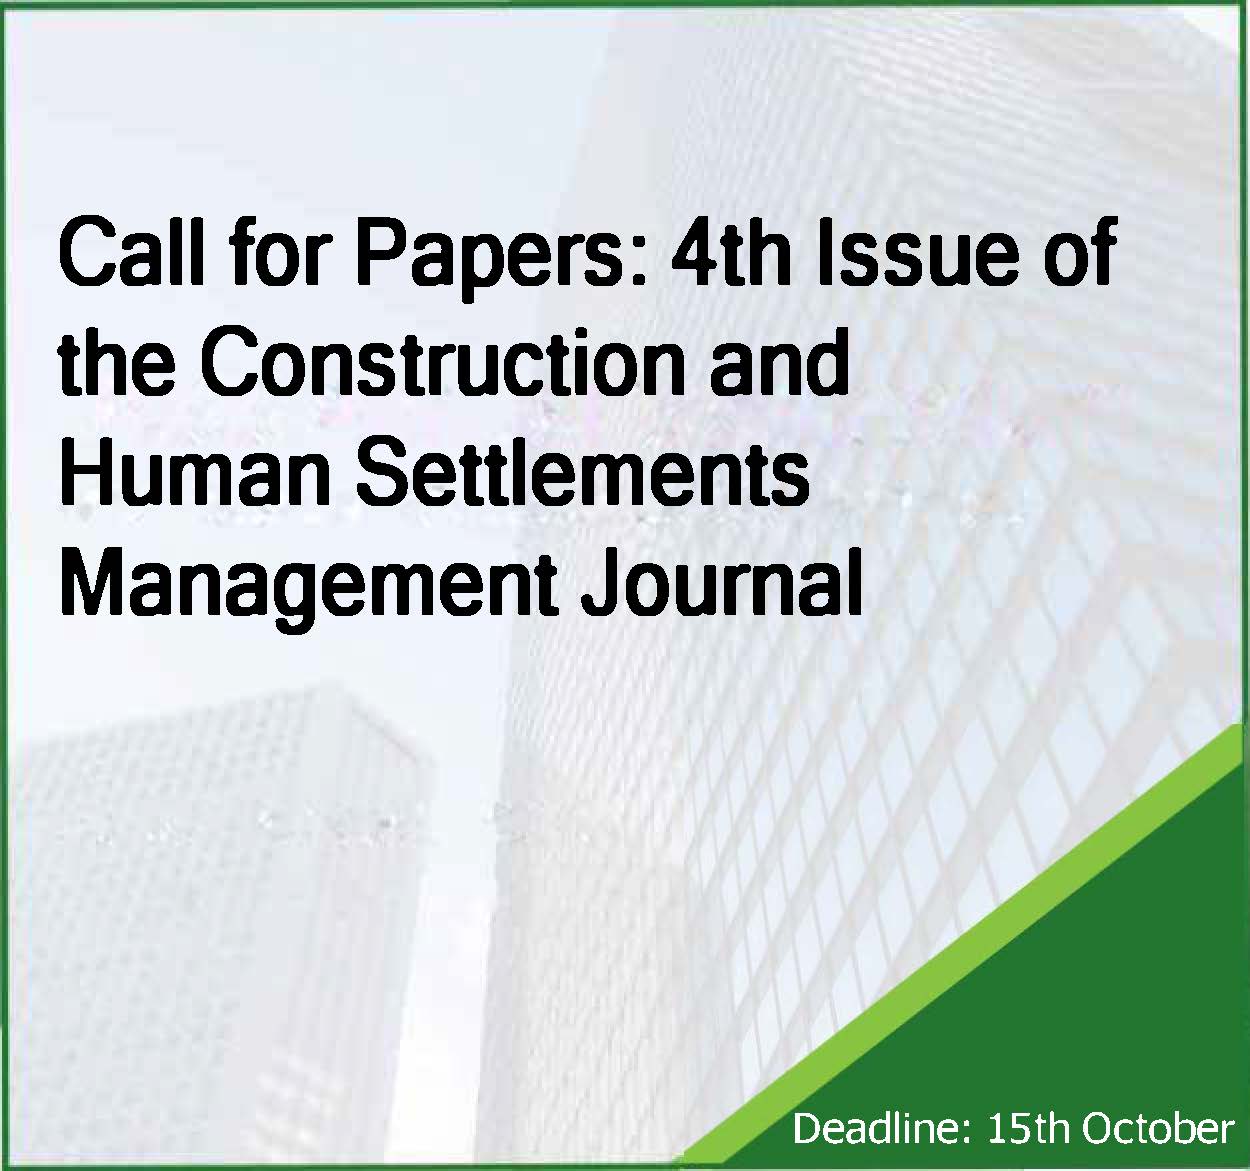 Call for Papers: 4th Issue of the Construction and Human Settlements Management Journal